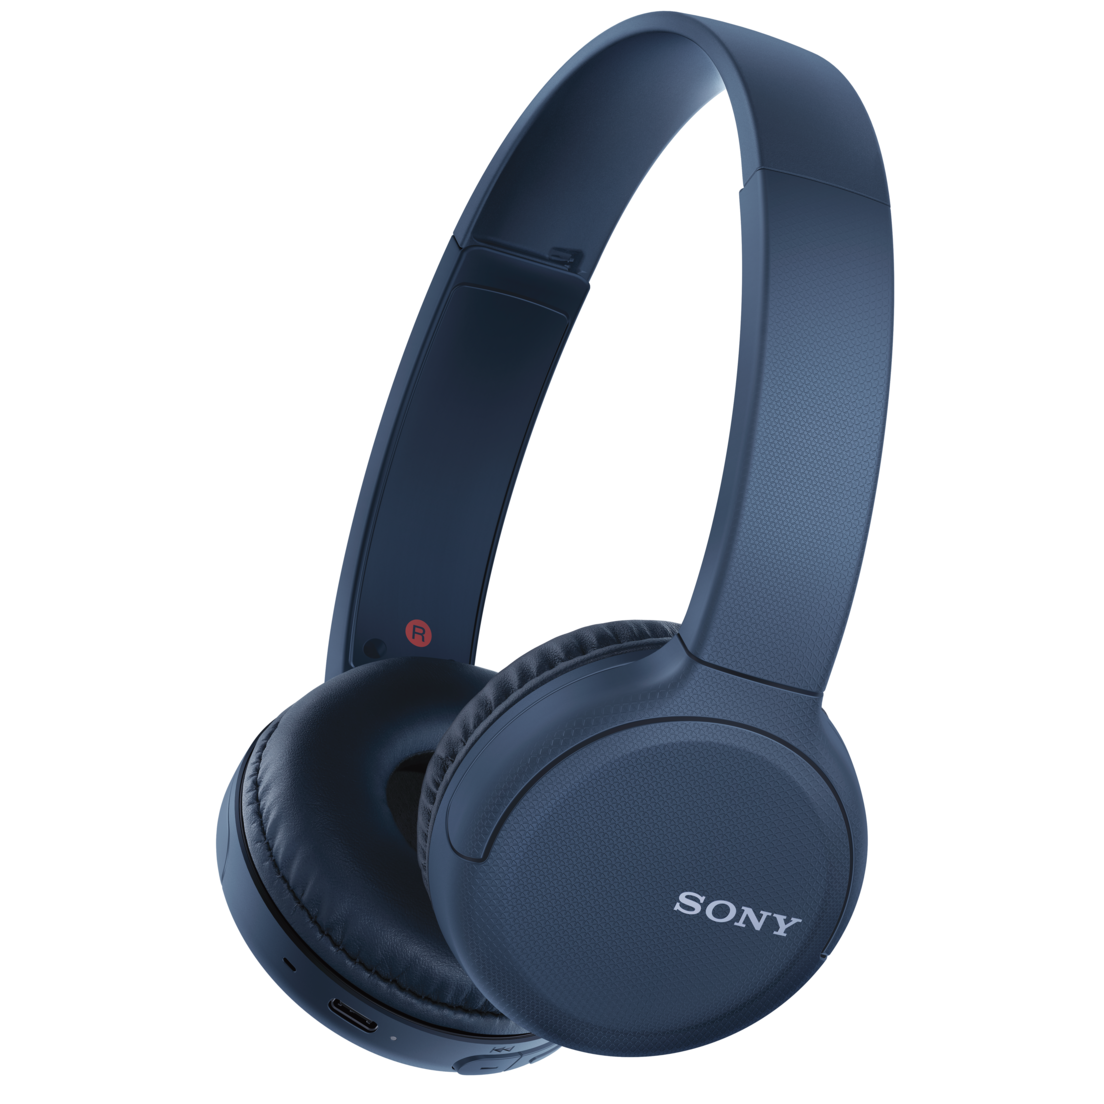 Sony WH-CH510 Wireless Headphones with Microphone, Blue - WH-CH510 L price  in Egypt